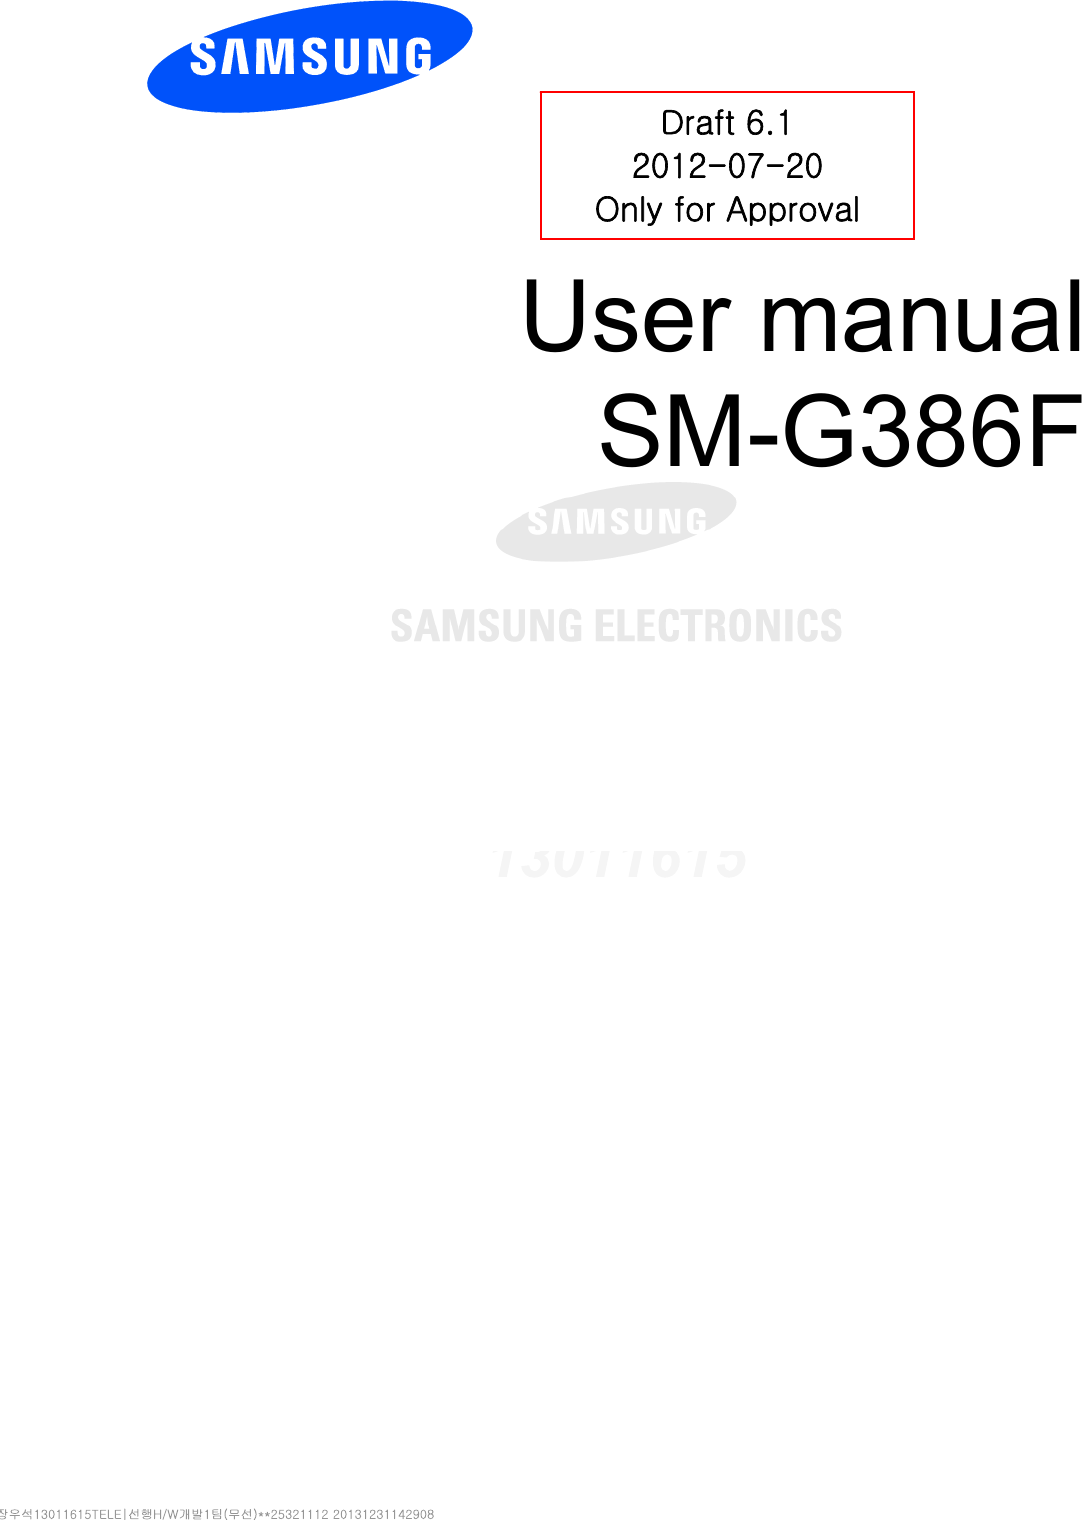          User manual SM-G386F         Draft 6.1 2012-07-20 Only for Approval 